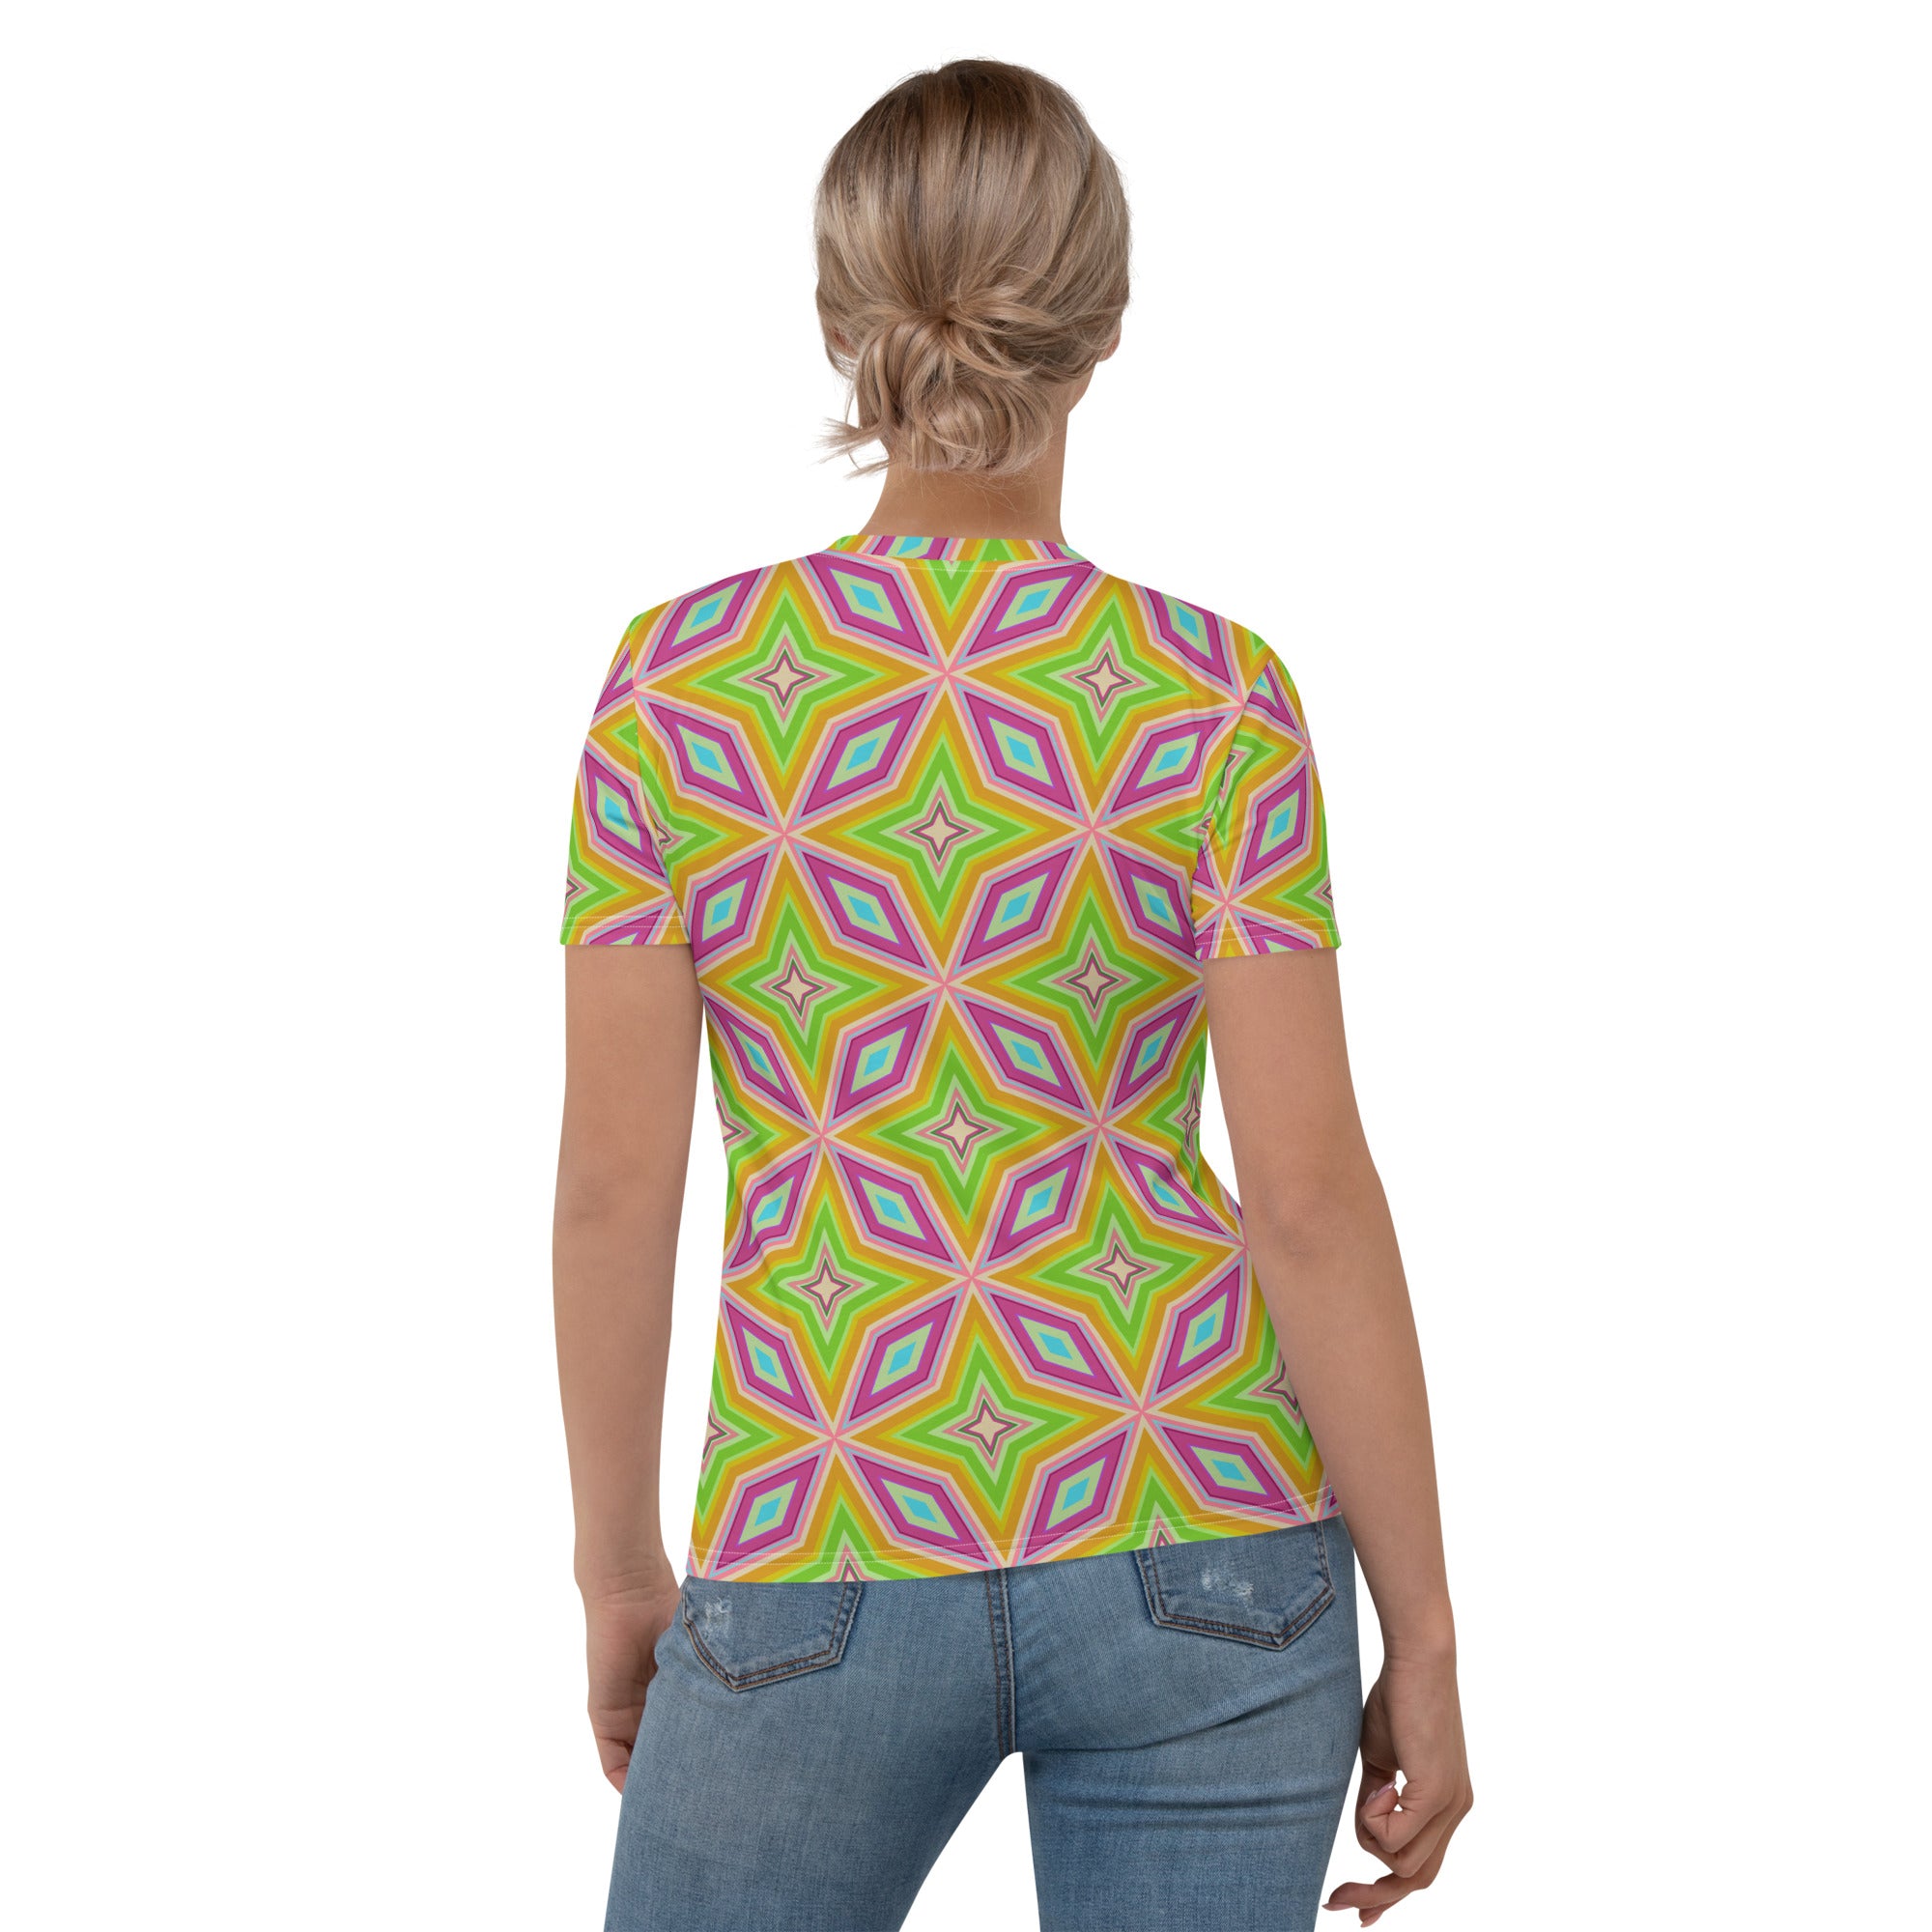 Women's tee with vibrant abstract art print